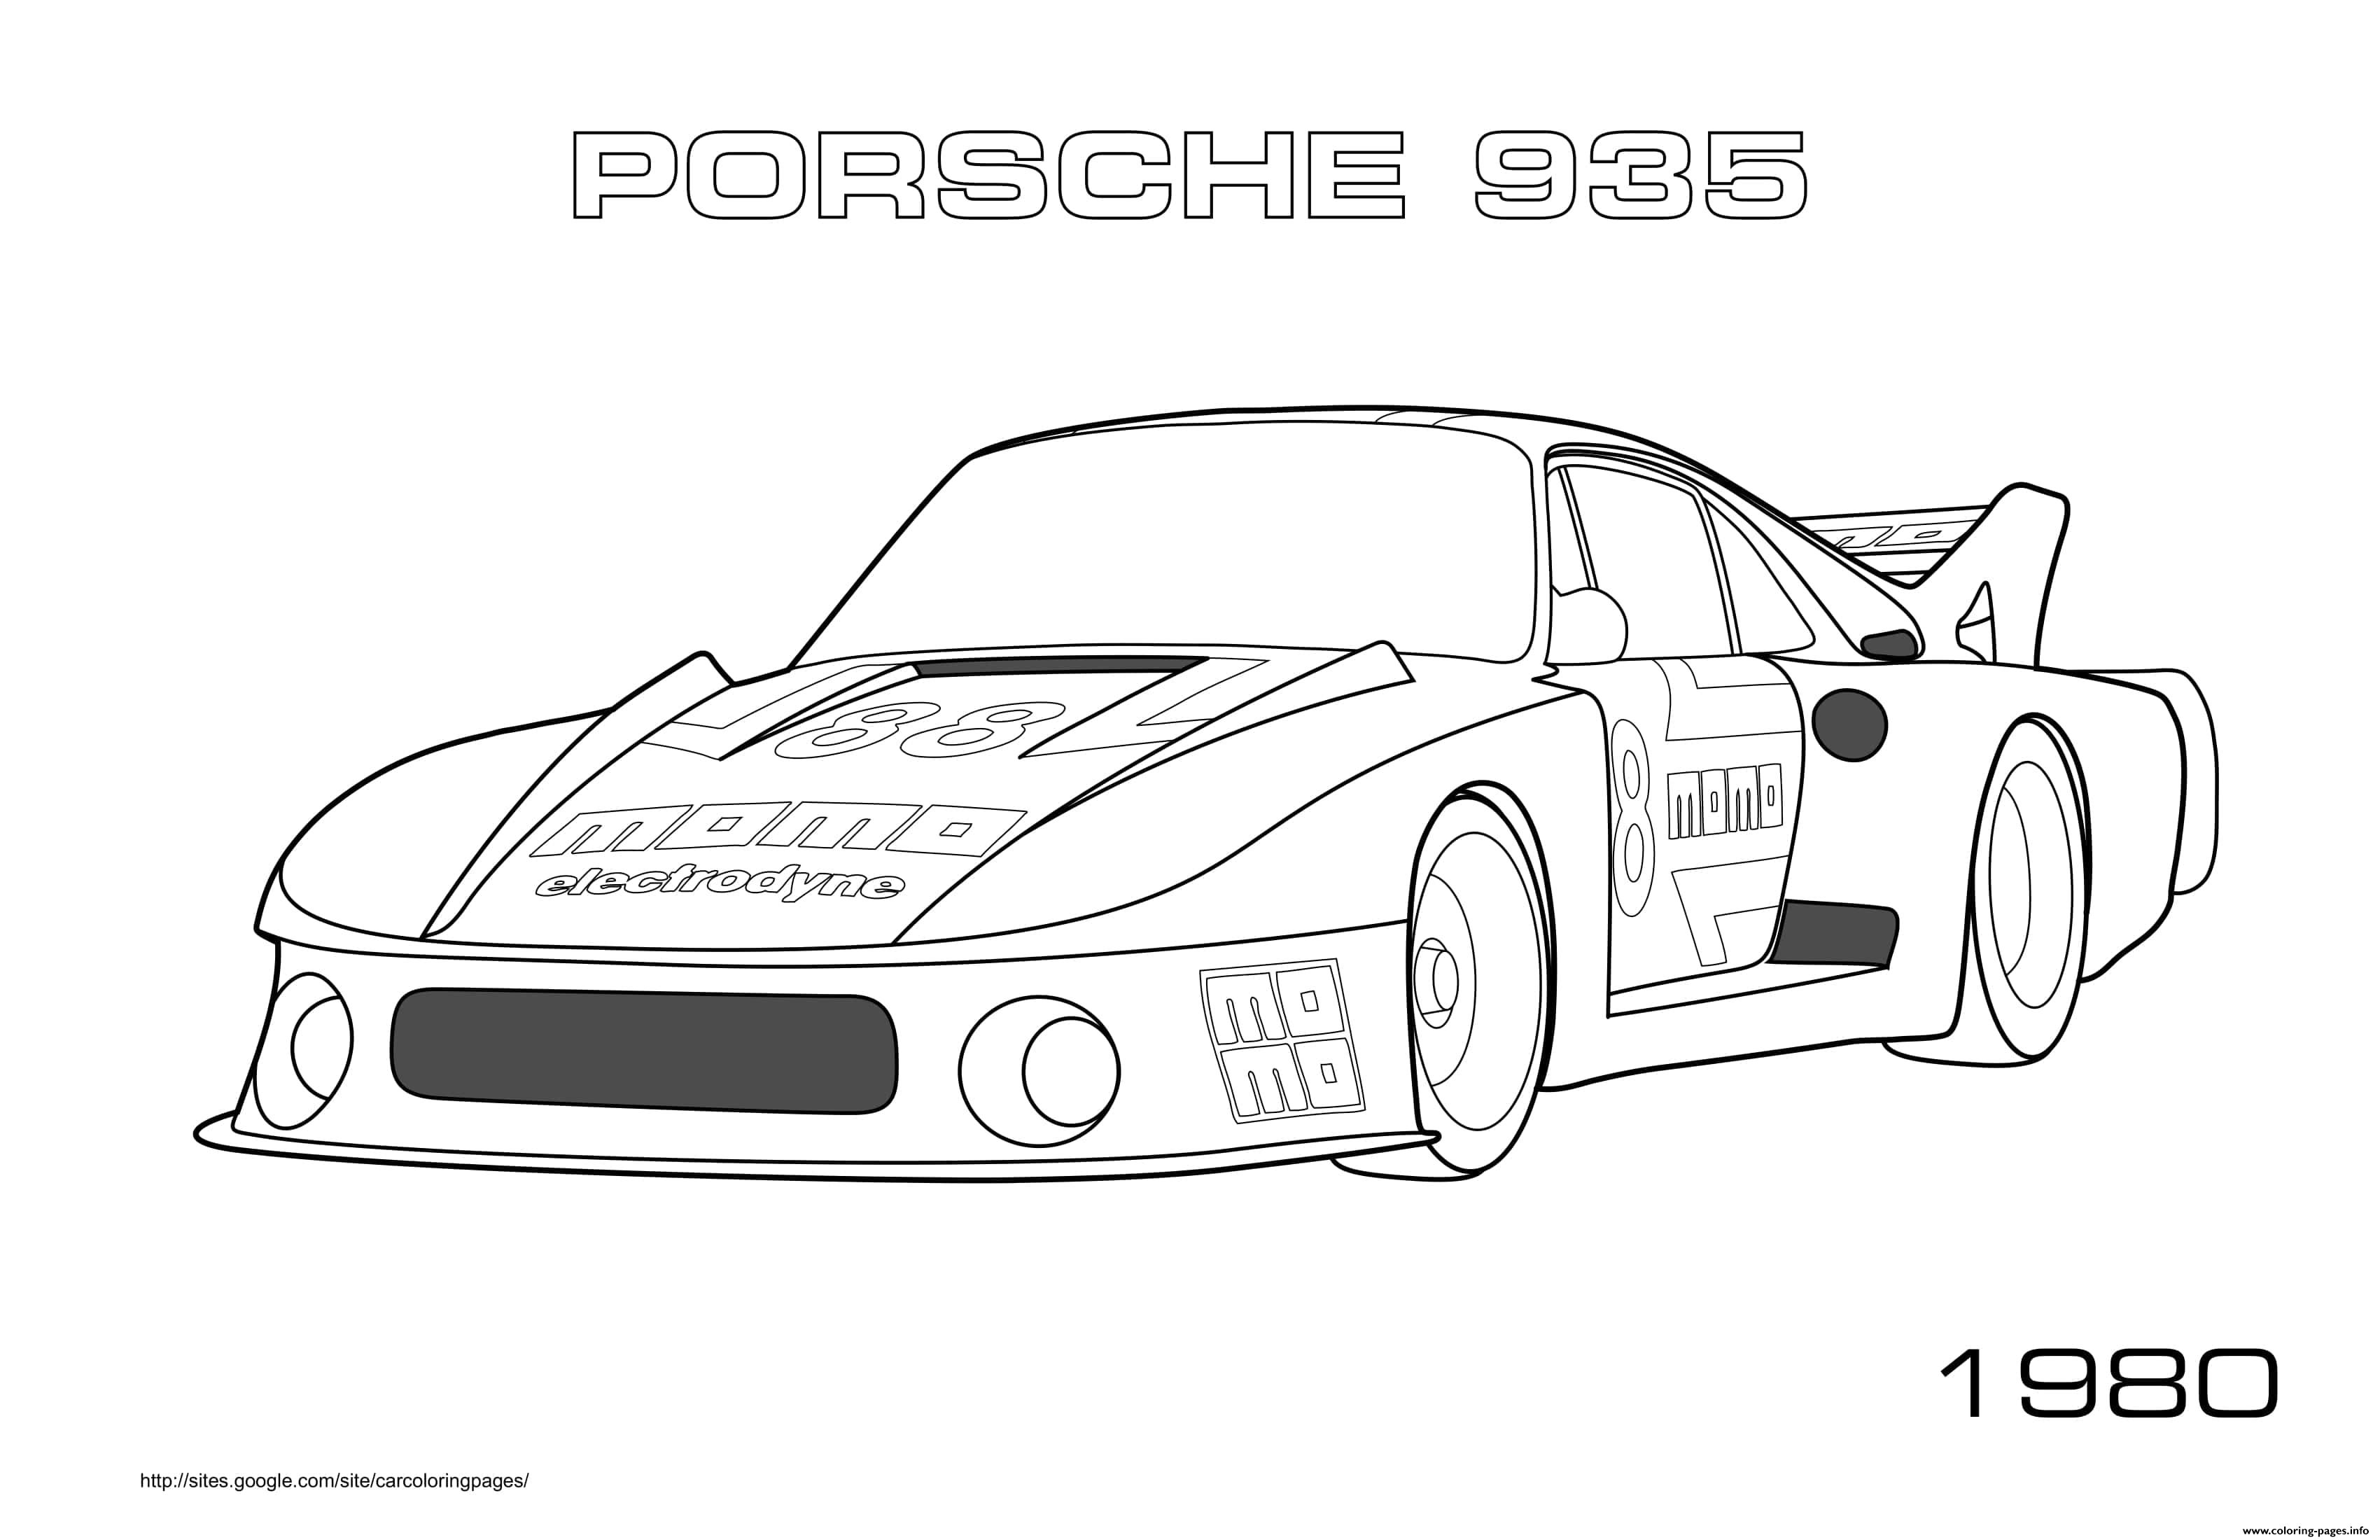 1980 porsche 935 coloring page Cars drawing porsche 917 1969 by ...